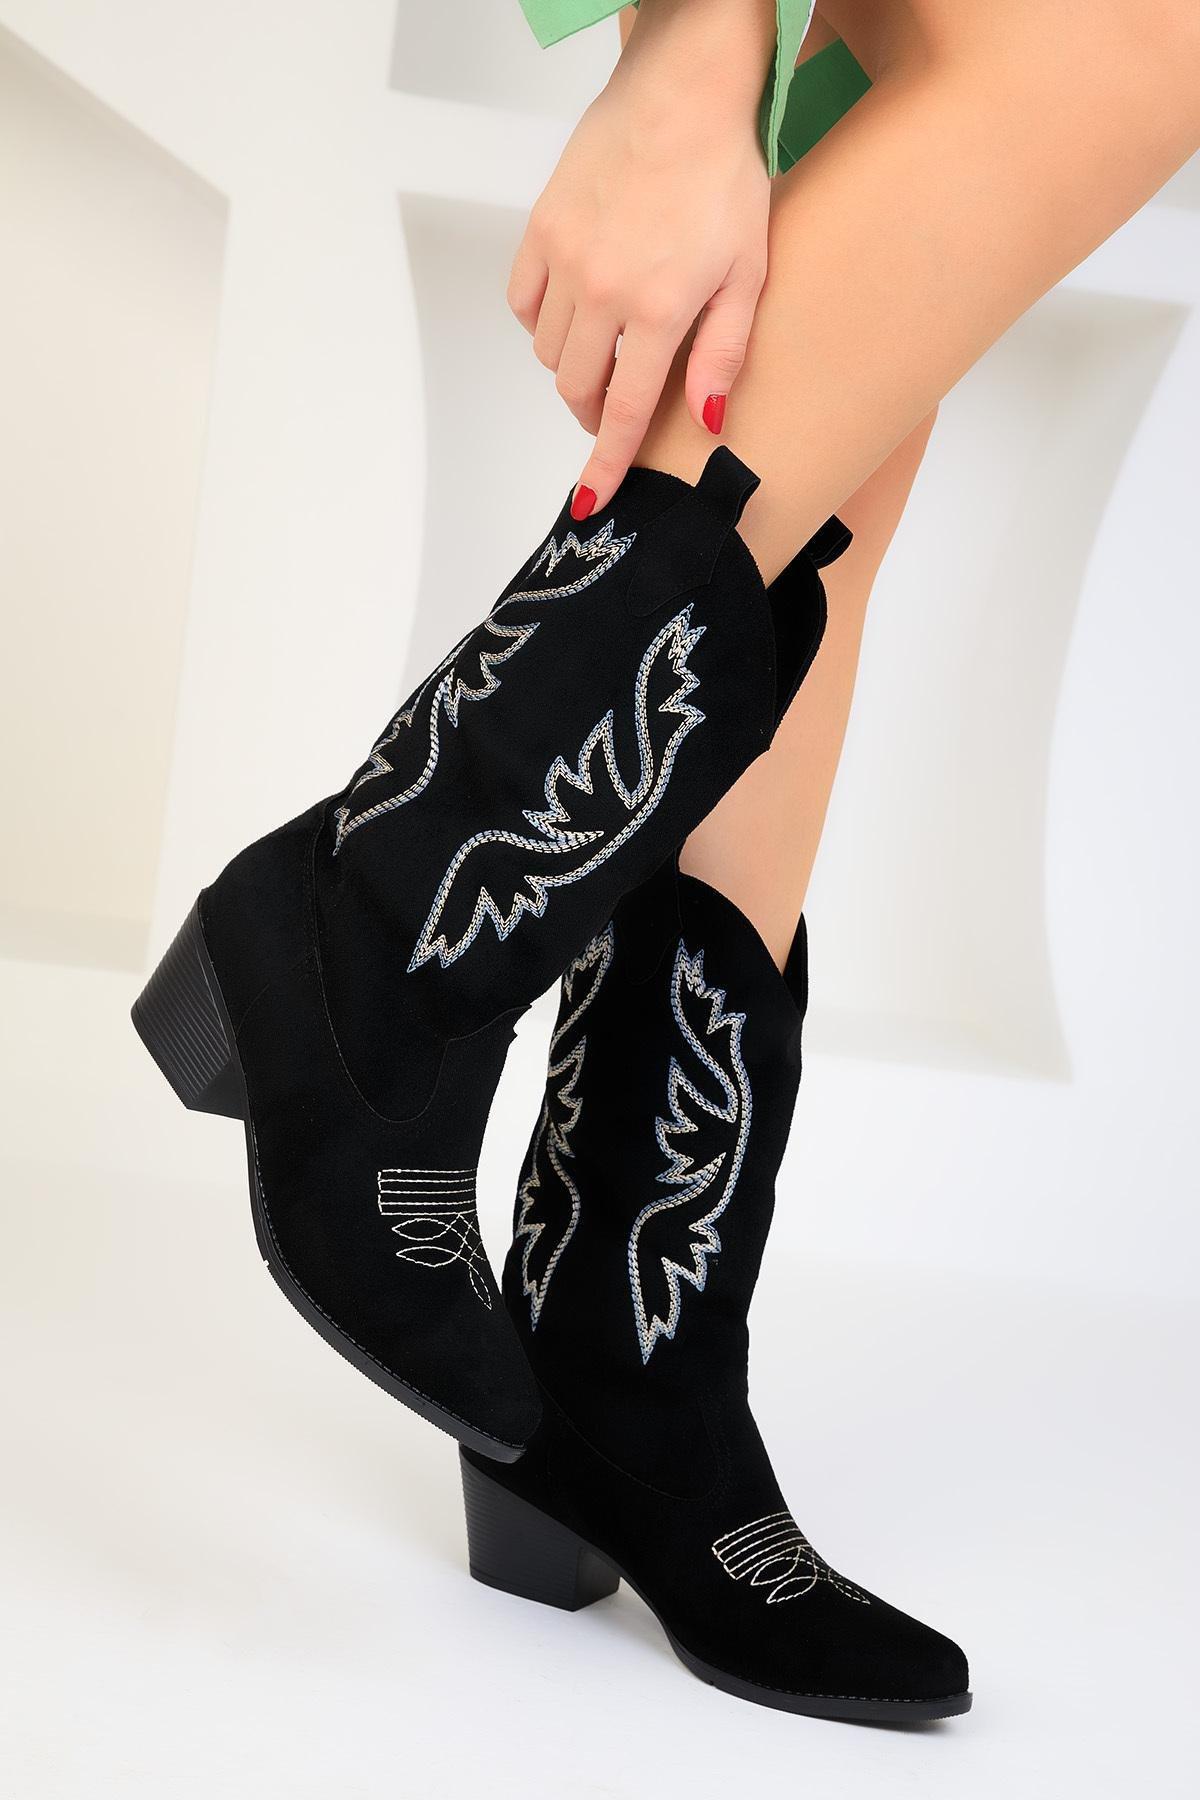 SOHO - Black Embroidery Design Suede Boots